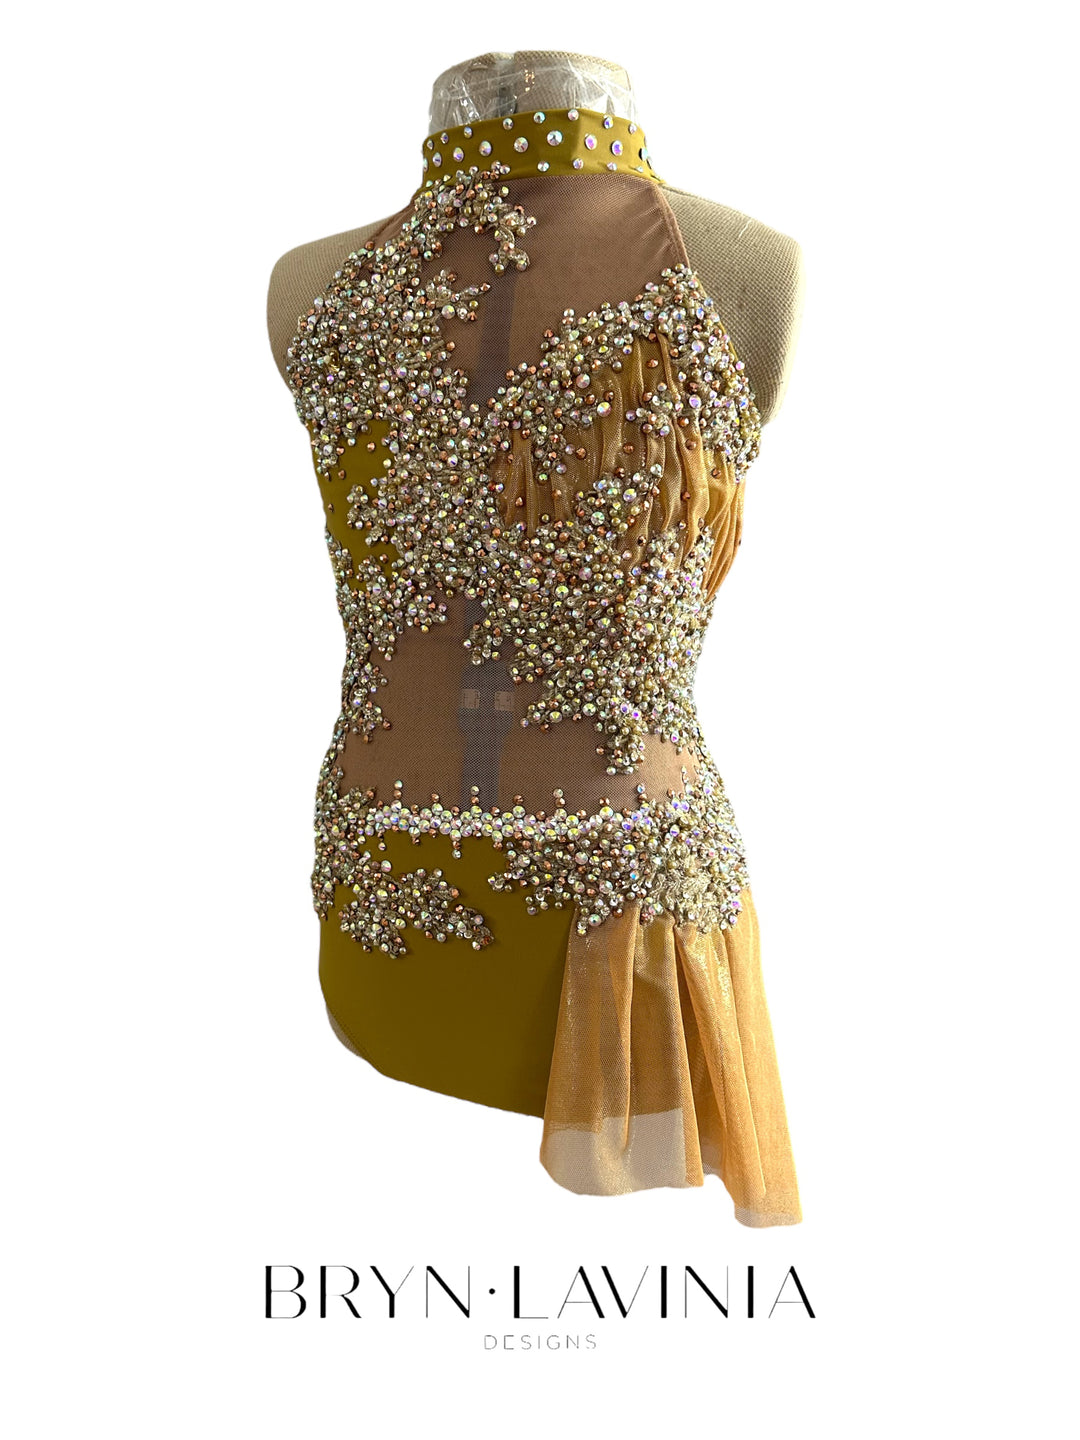 NEW Child Large Gold ready to ship costume